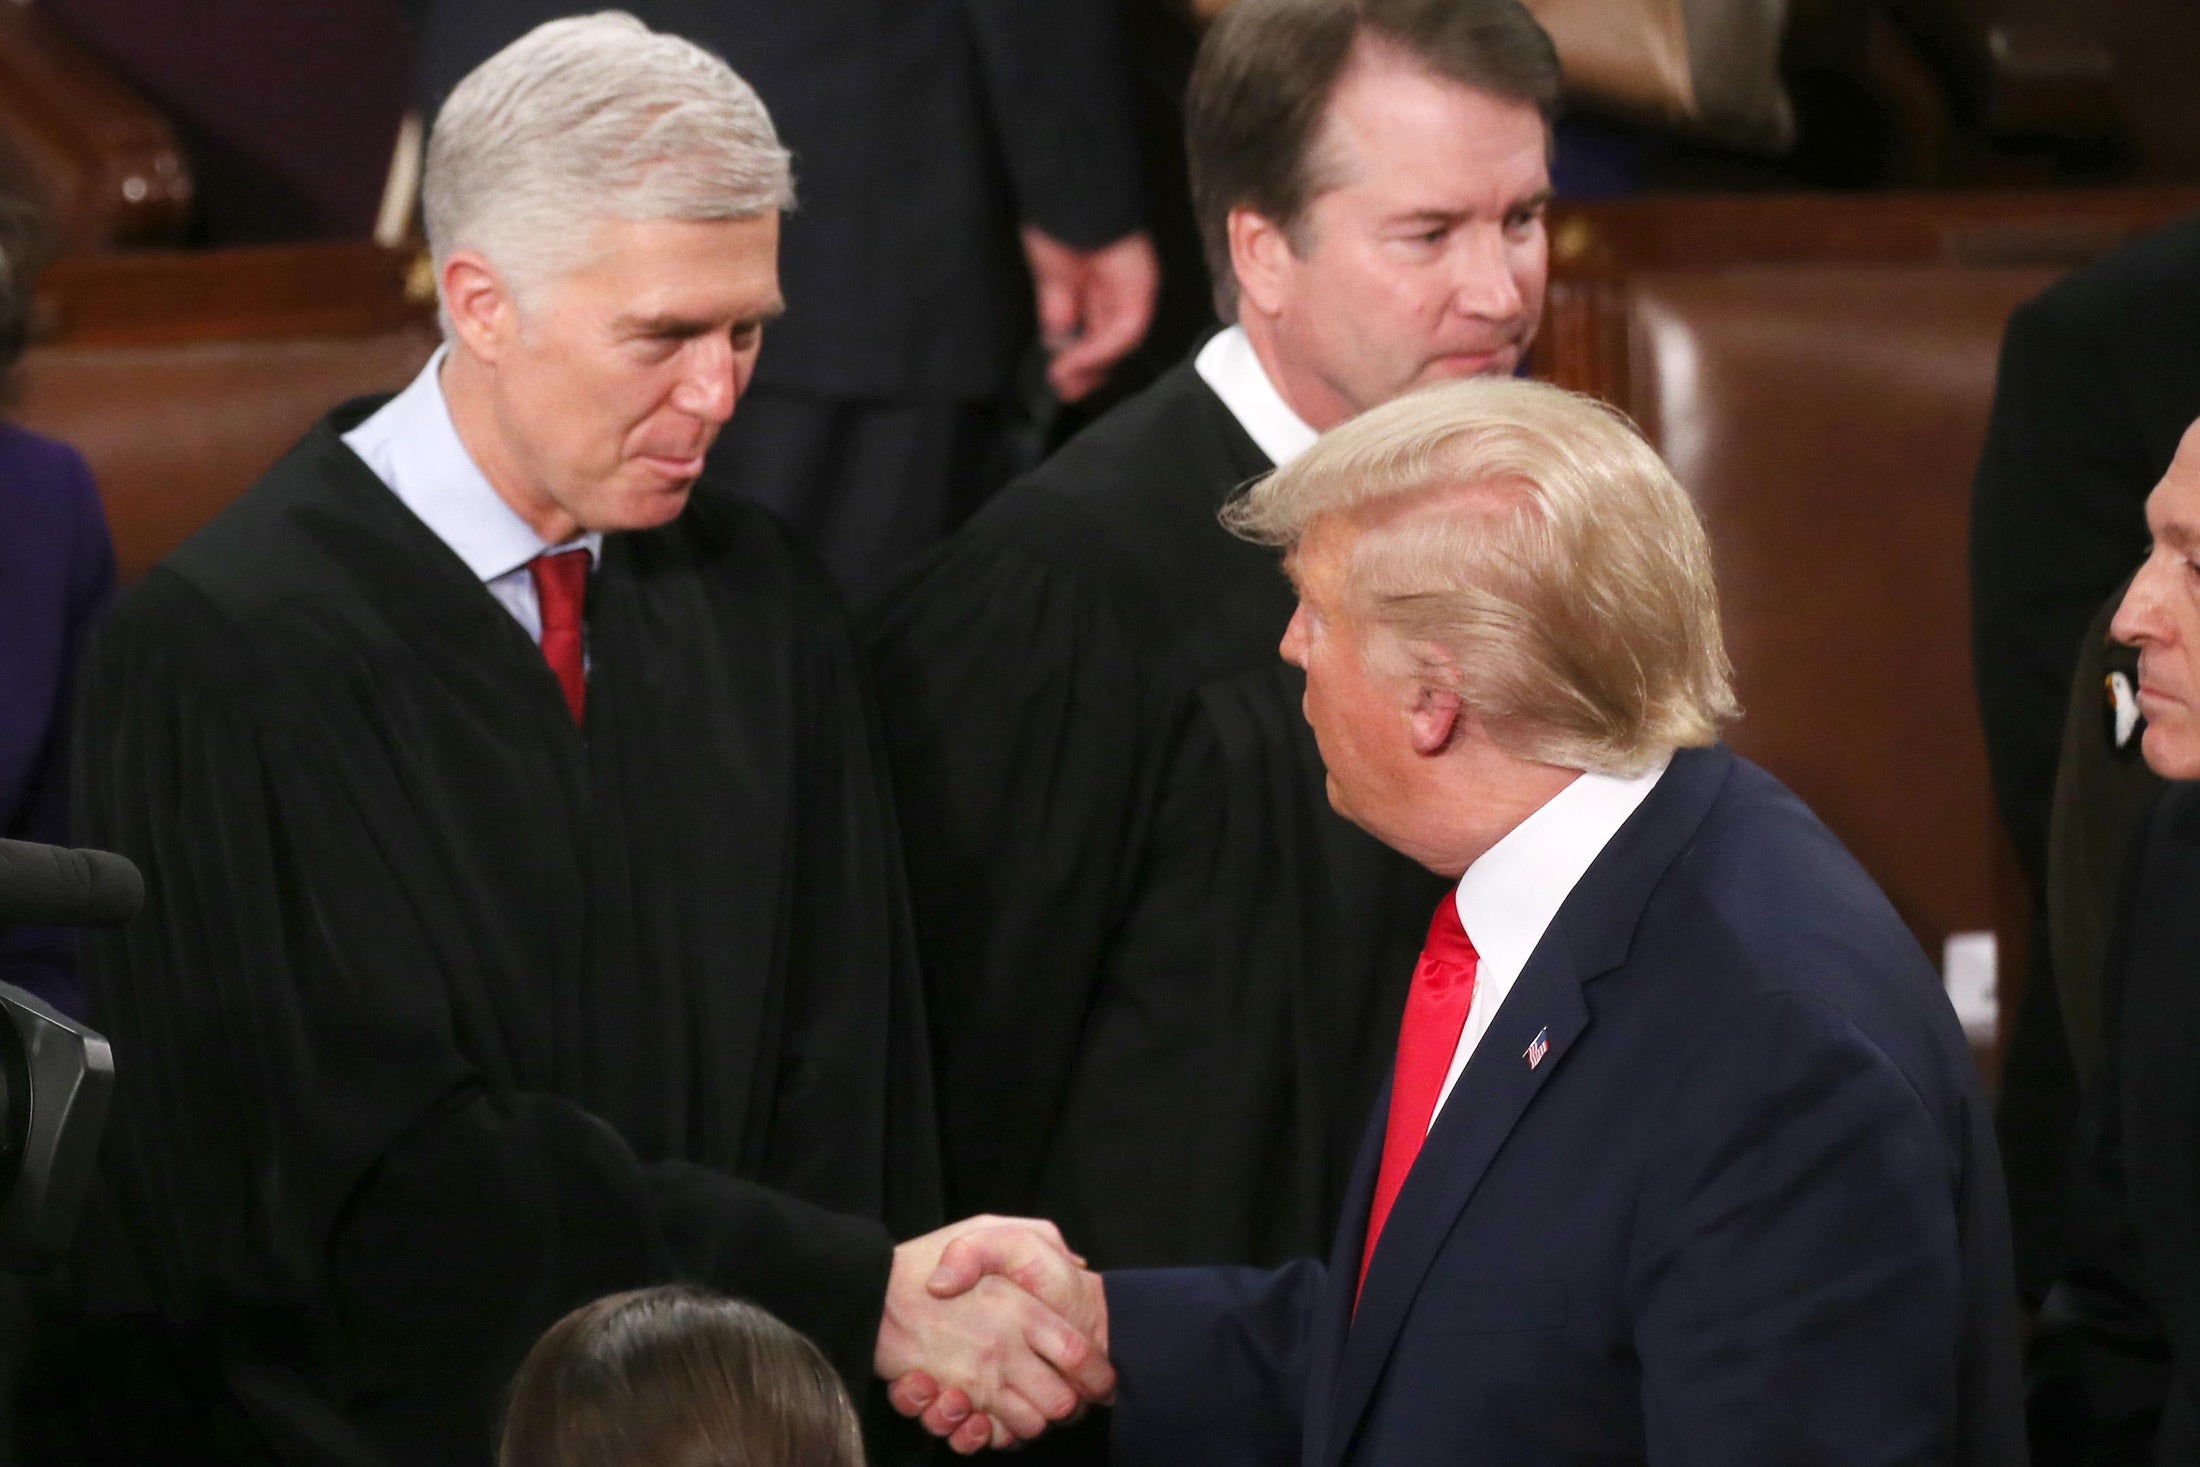 Donald Trump greets Supreme Court Justice Neil Gorsuch ahead of the State of the Union address on Feb. 4, 2020 Mario Tama:Getty Images